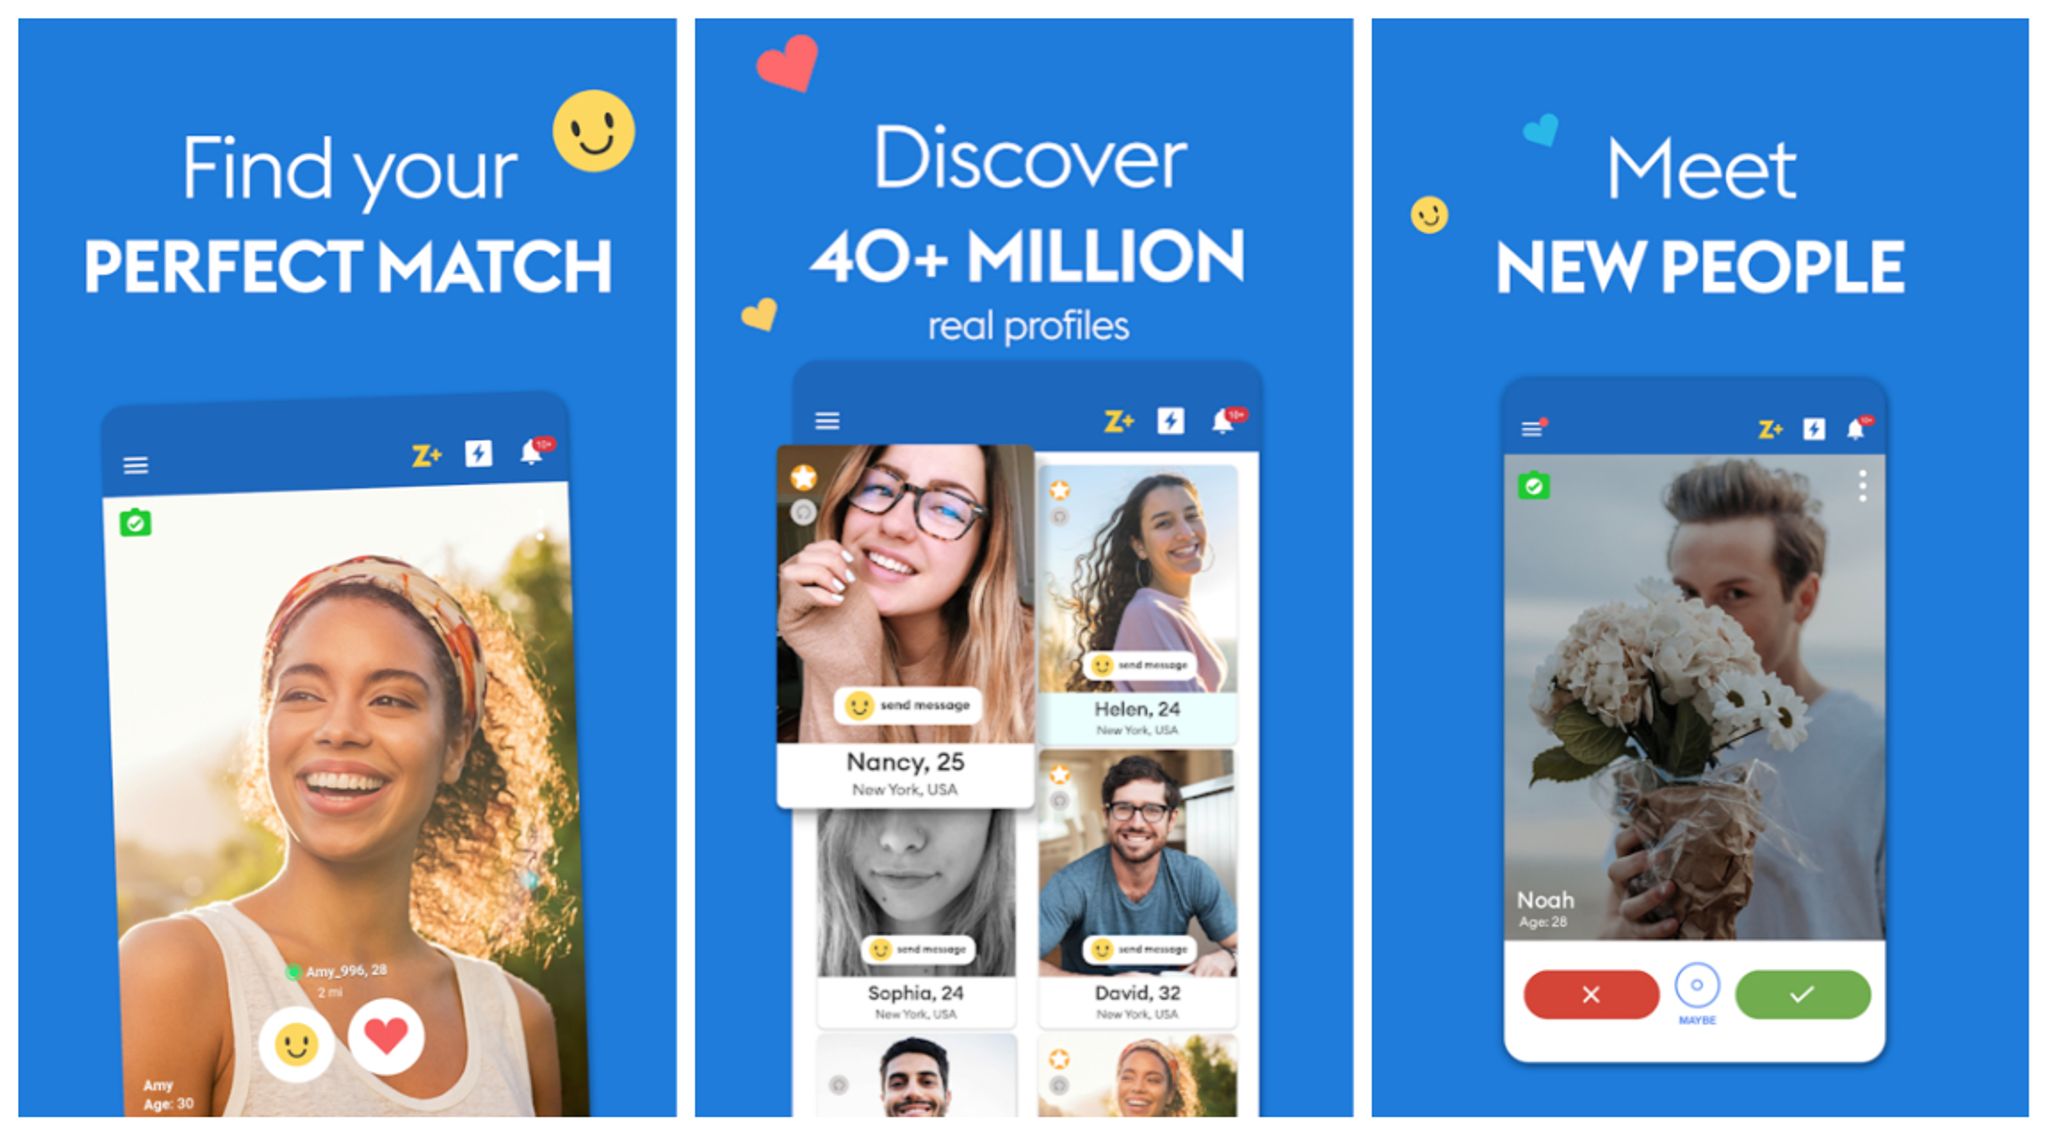 Zoosk, one of the famous plus size dating apps